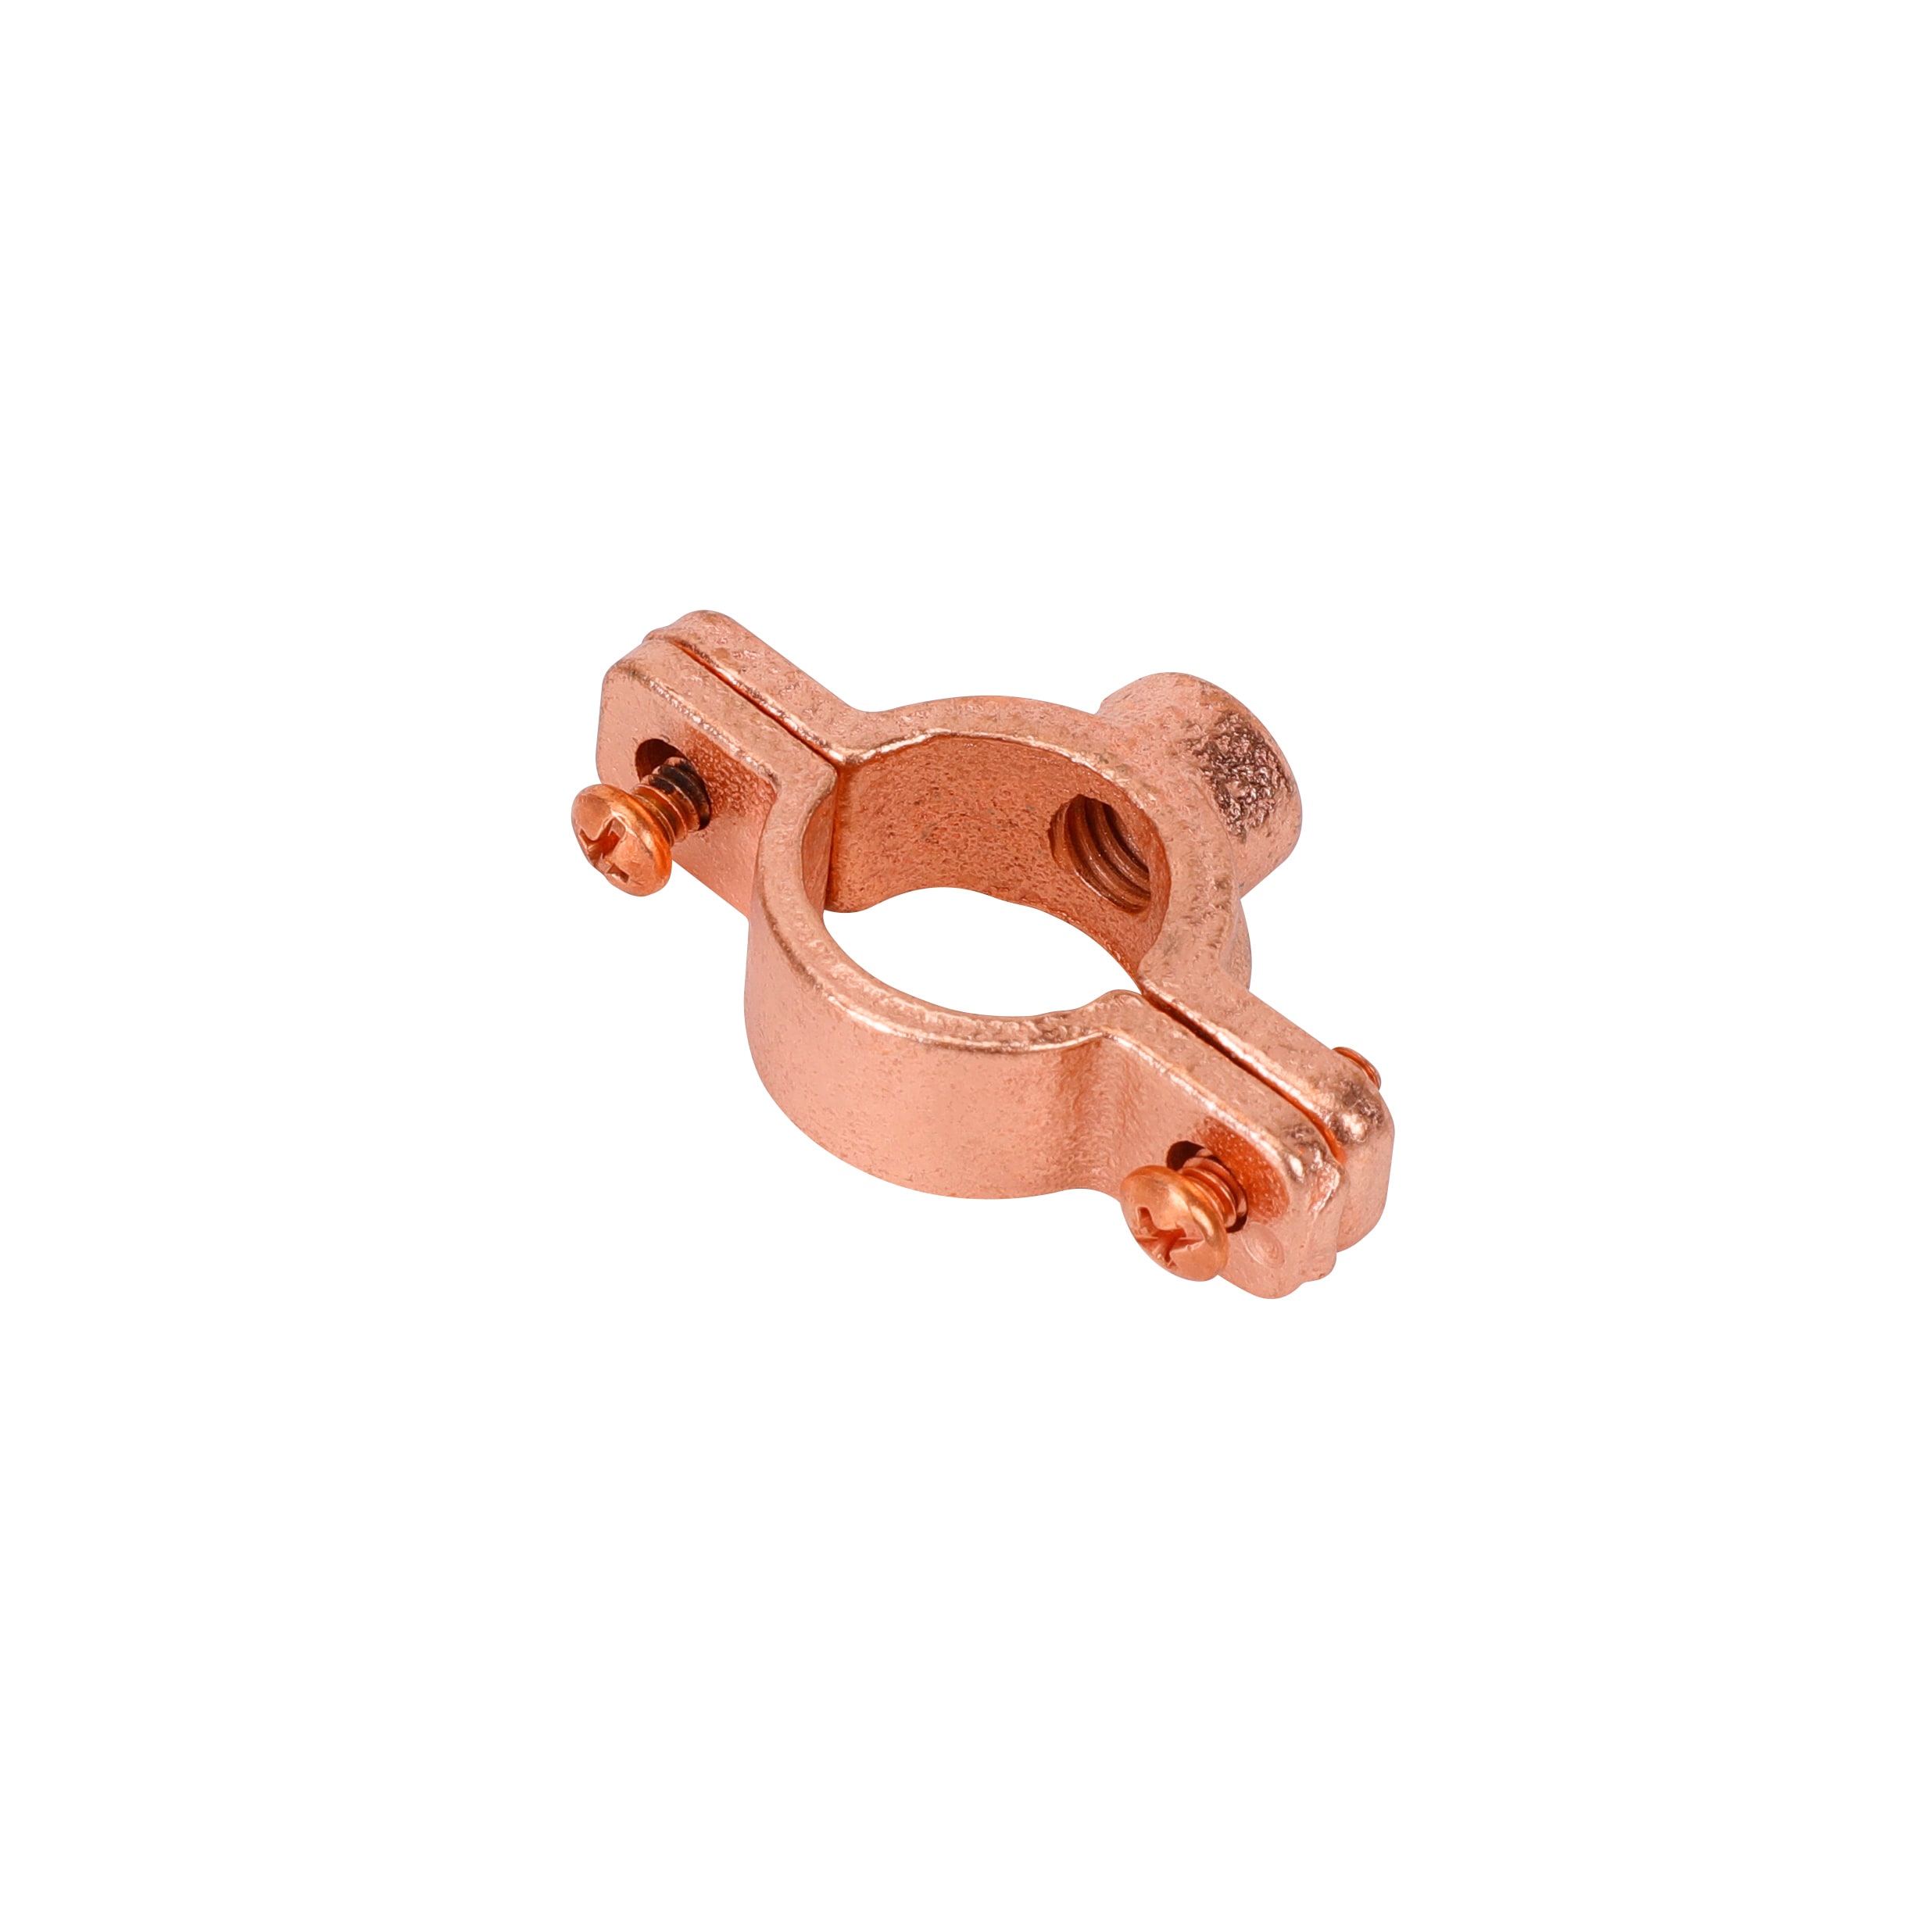 3373-1 Wire Support Ring with Clamp 2 Inch dia